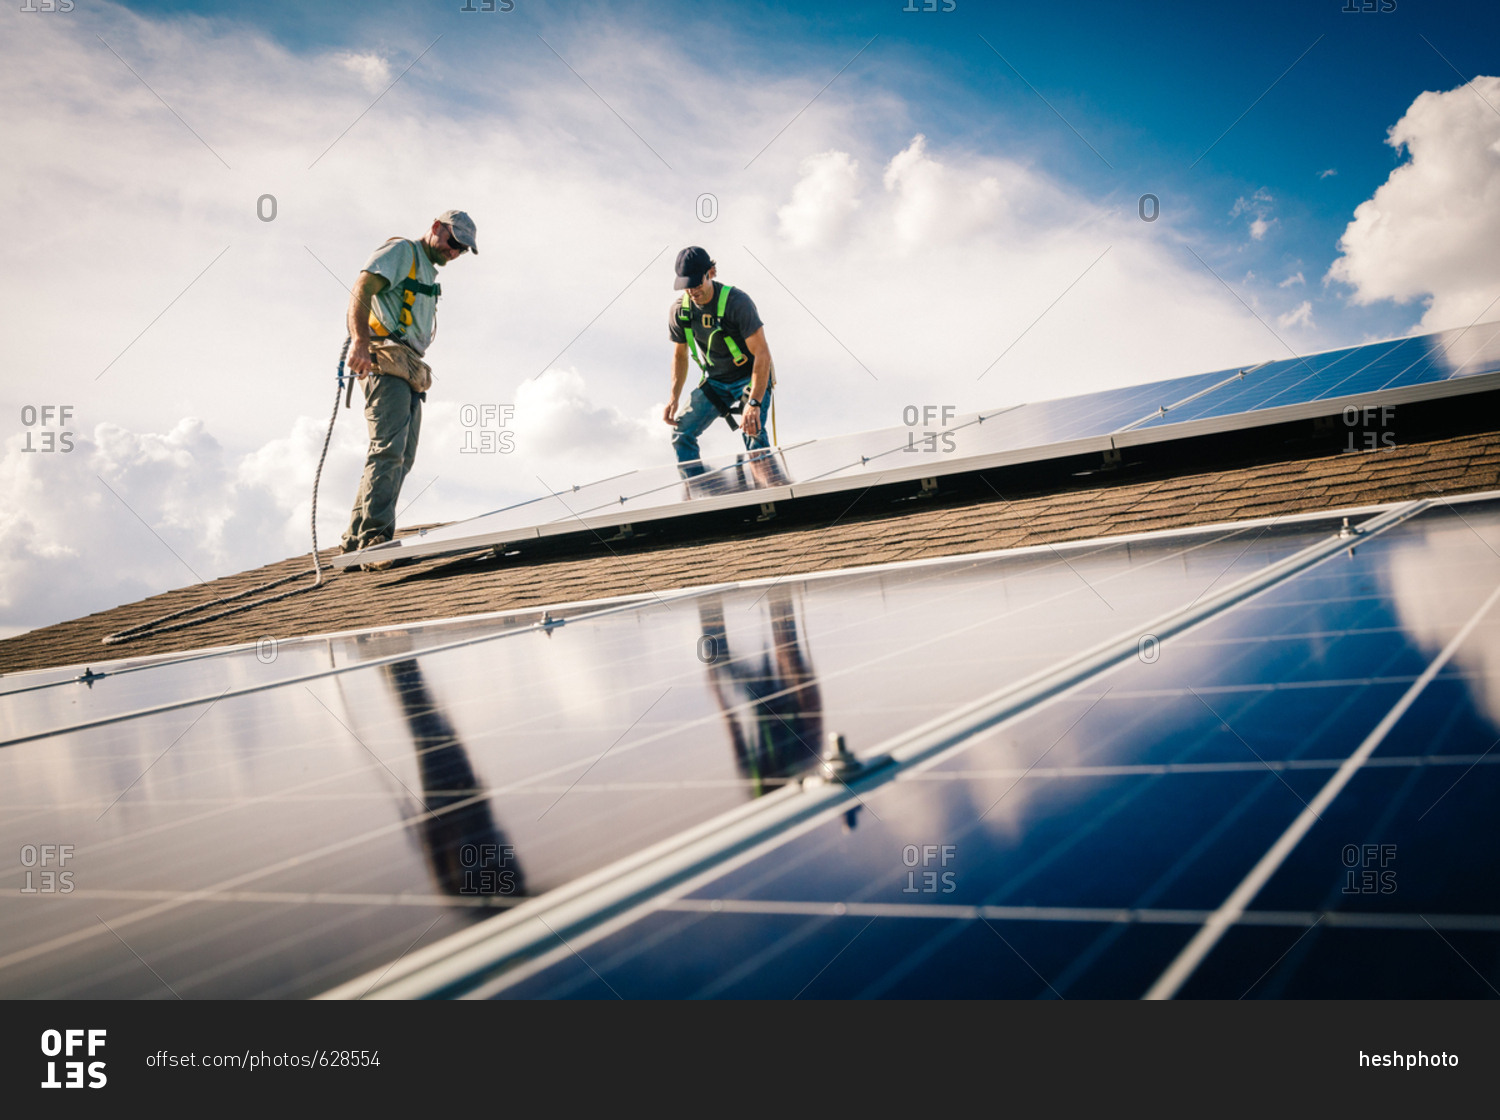 Construction workers on a roof installing solar panels